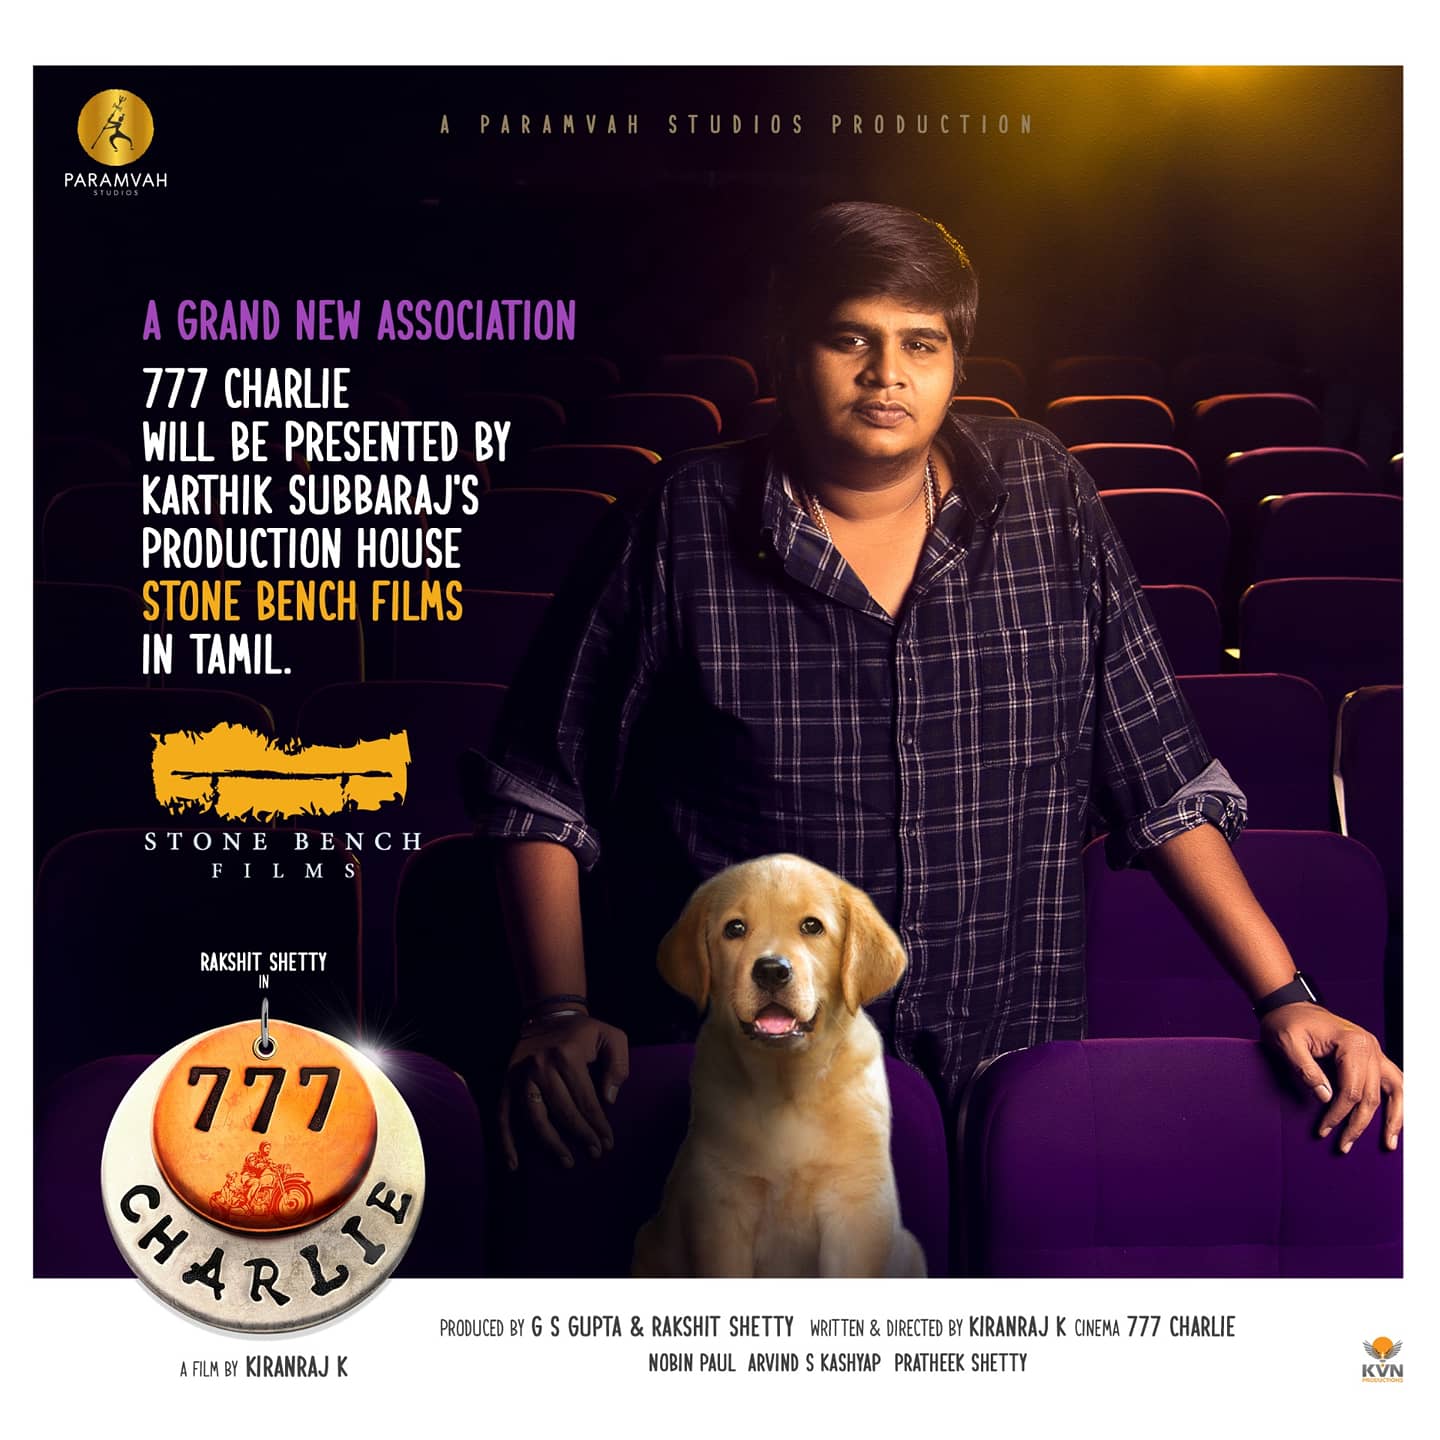 After Prithviraj, ace director Karthik Subbaraj joins team ‘777 Charlie’ to distribute the film in Tamil